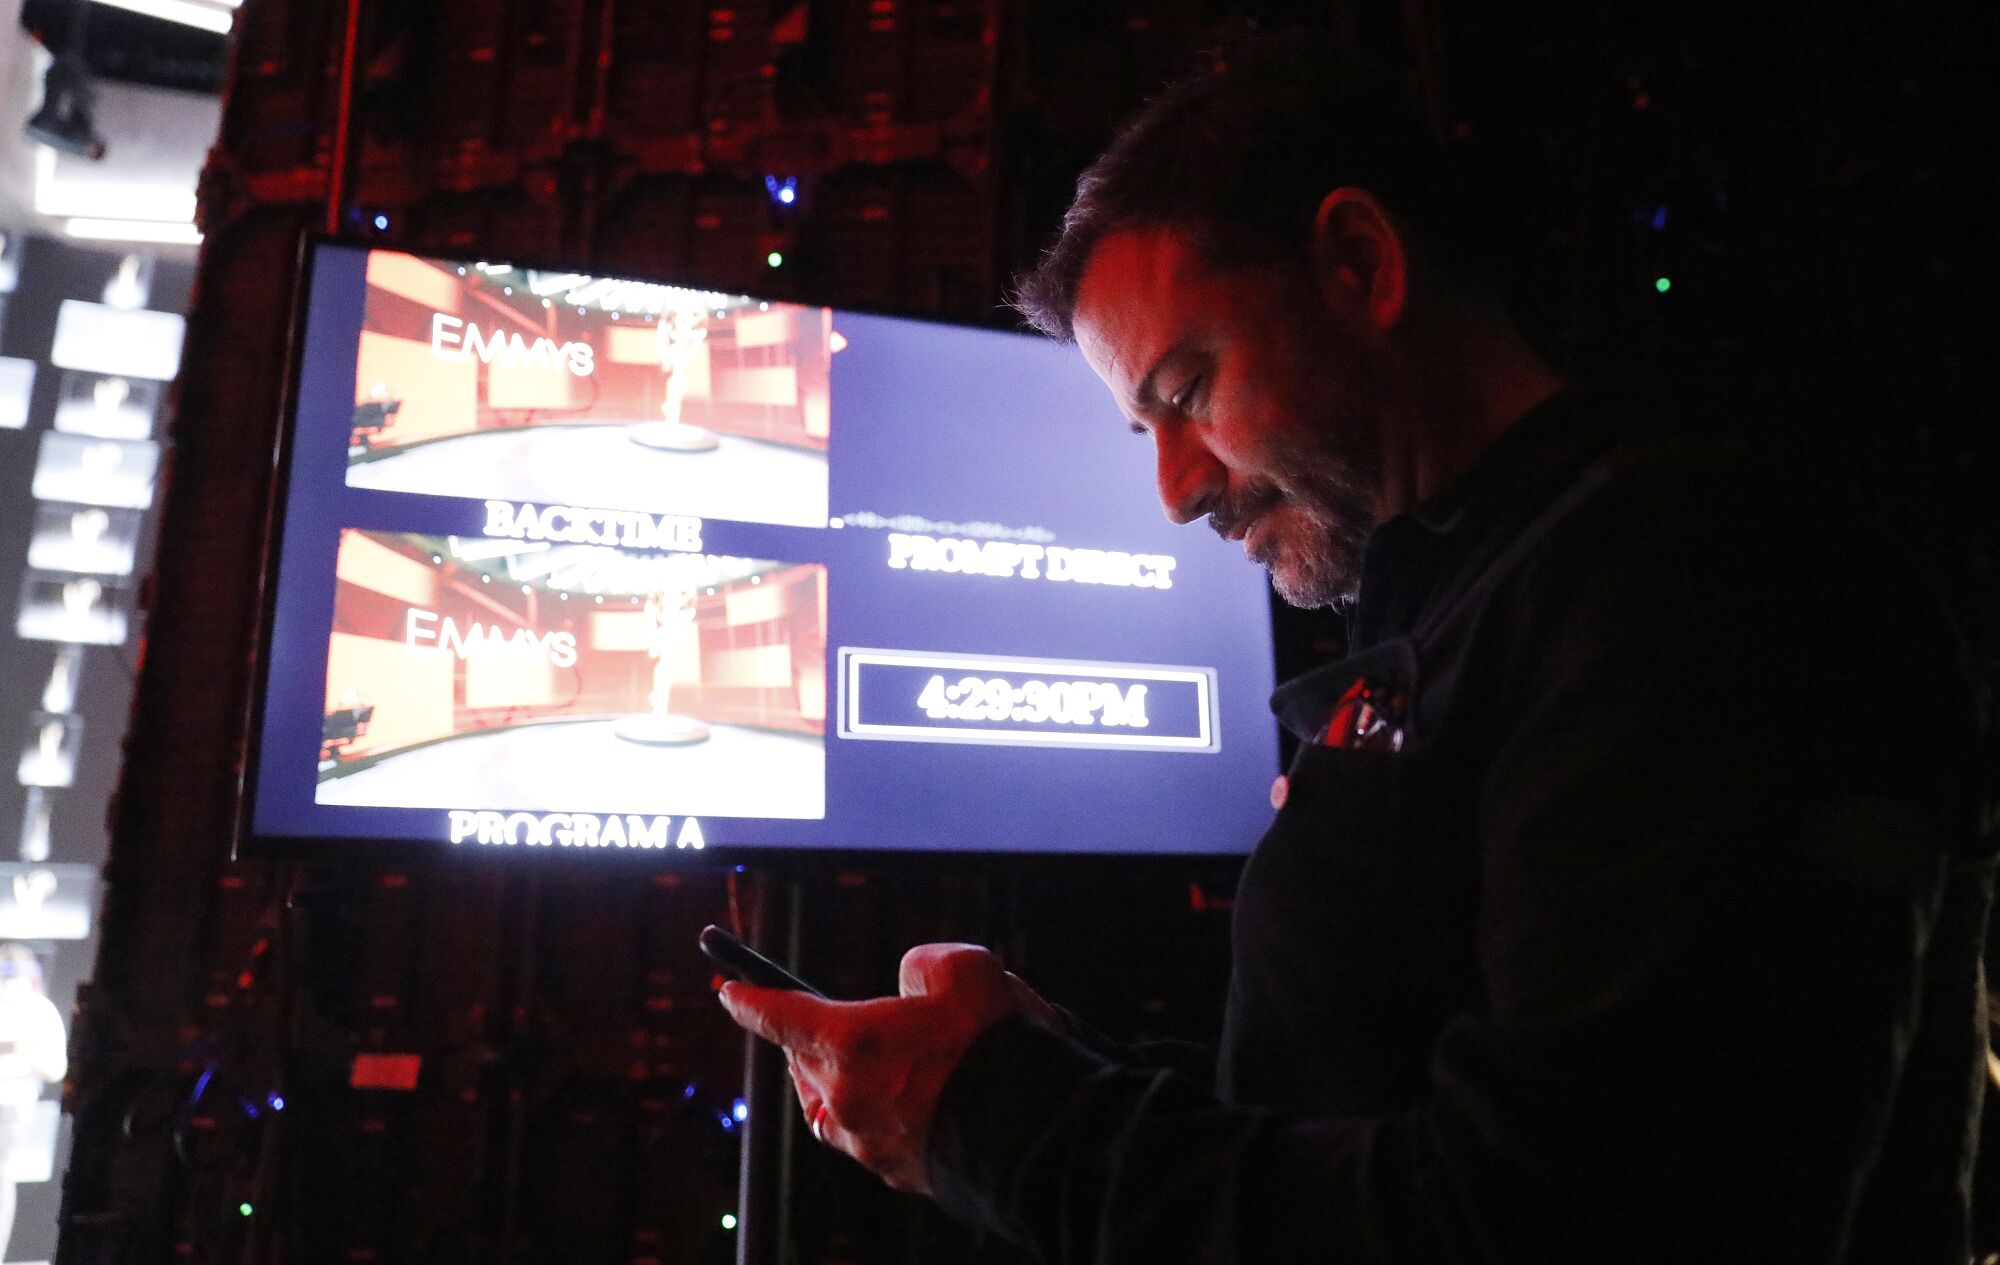  Emmys host Jimmy Kimmel backstage during rehearsals Friday.